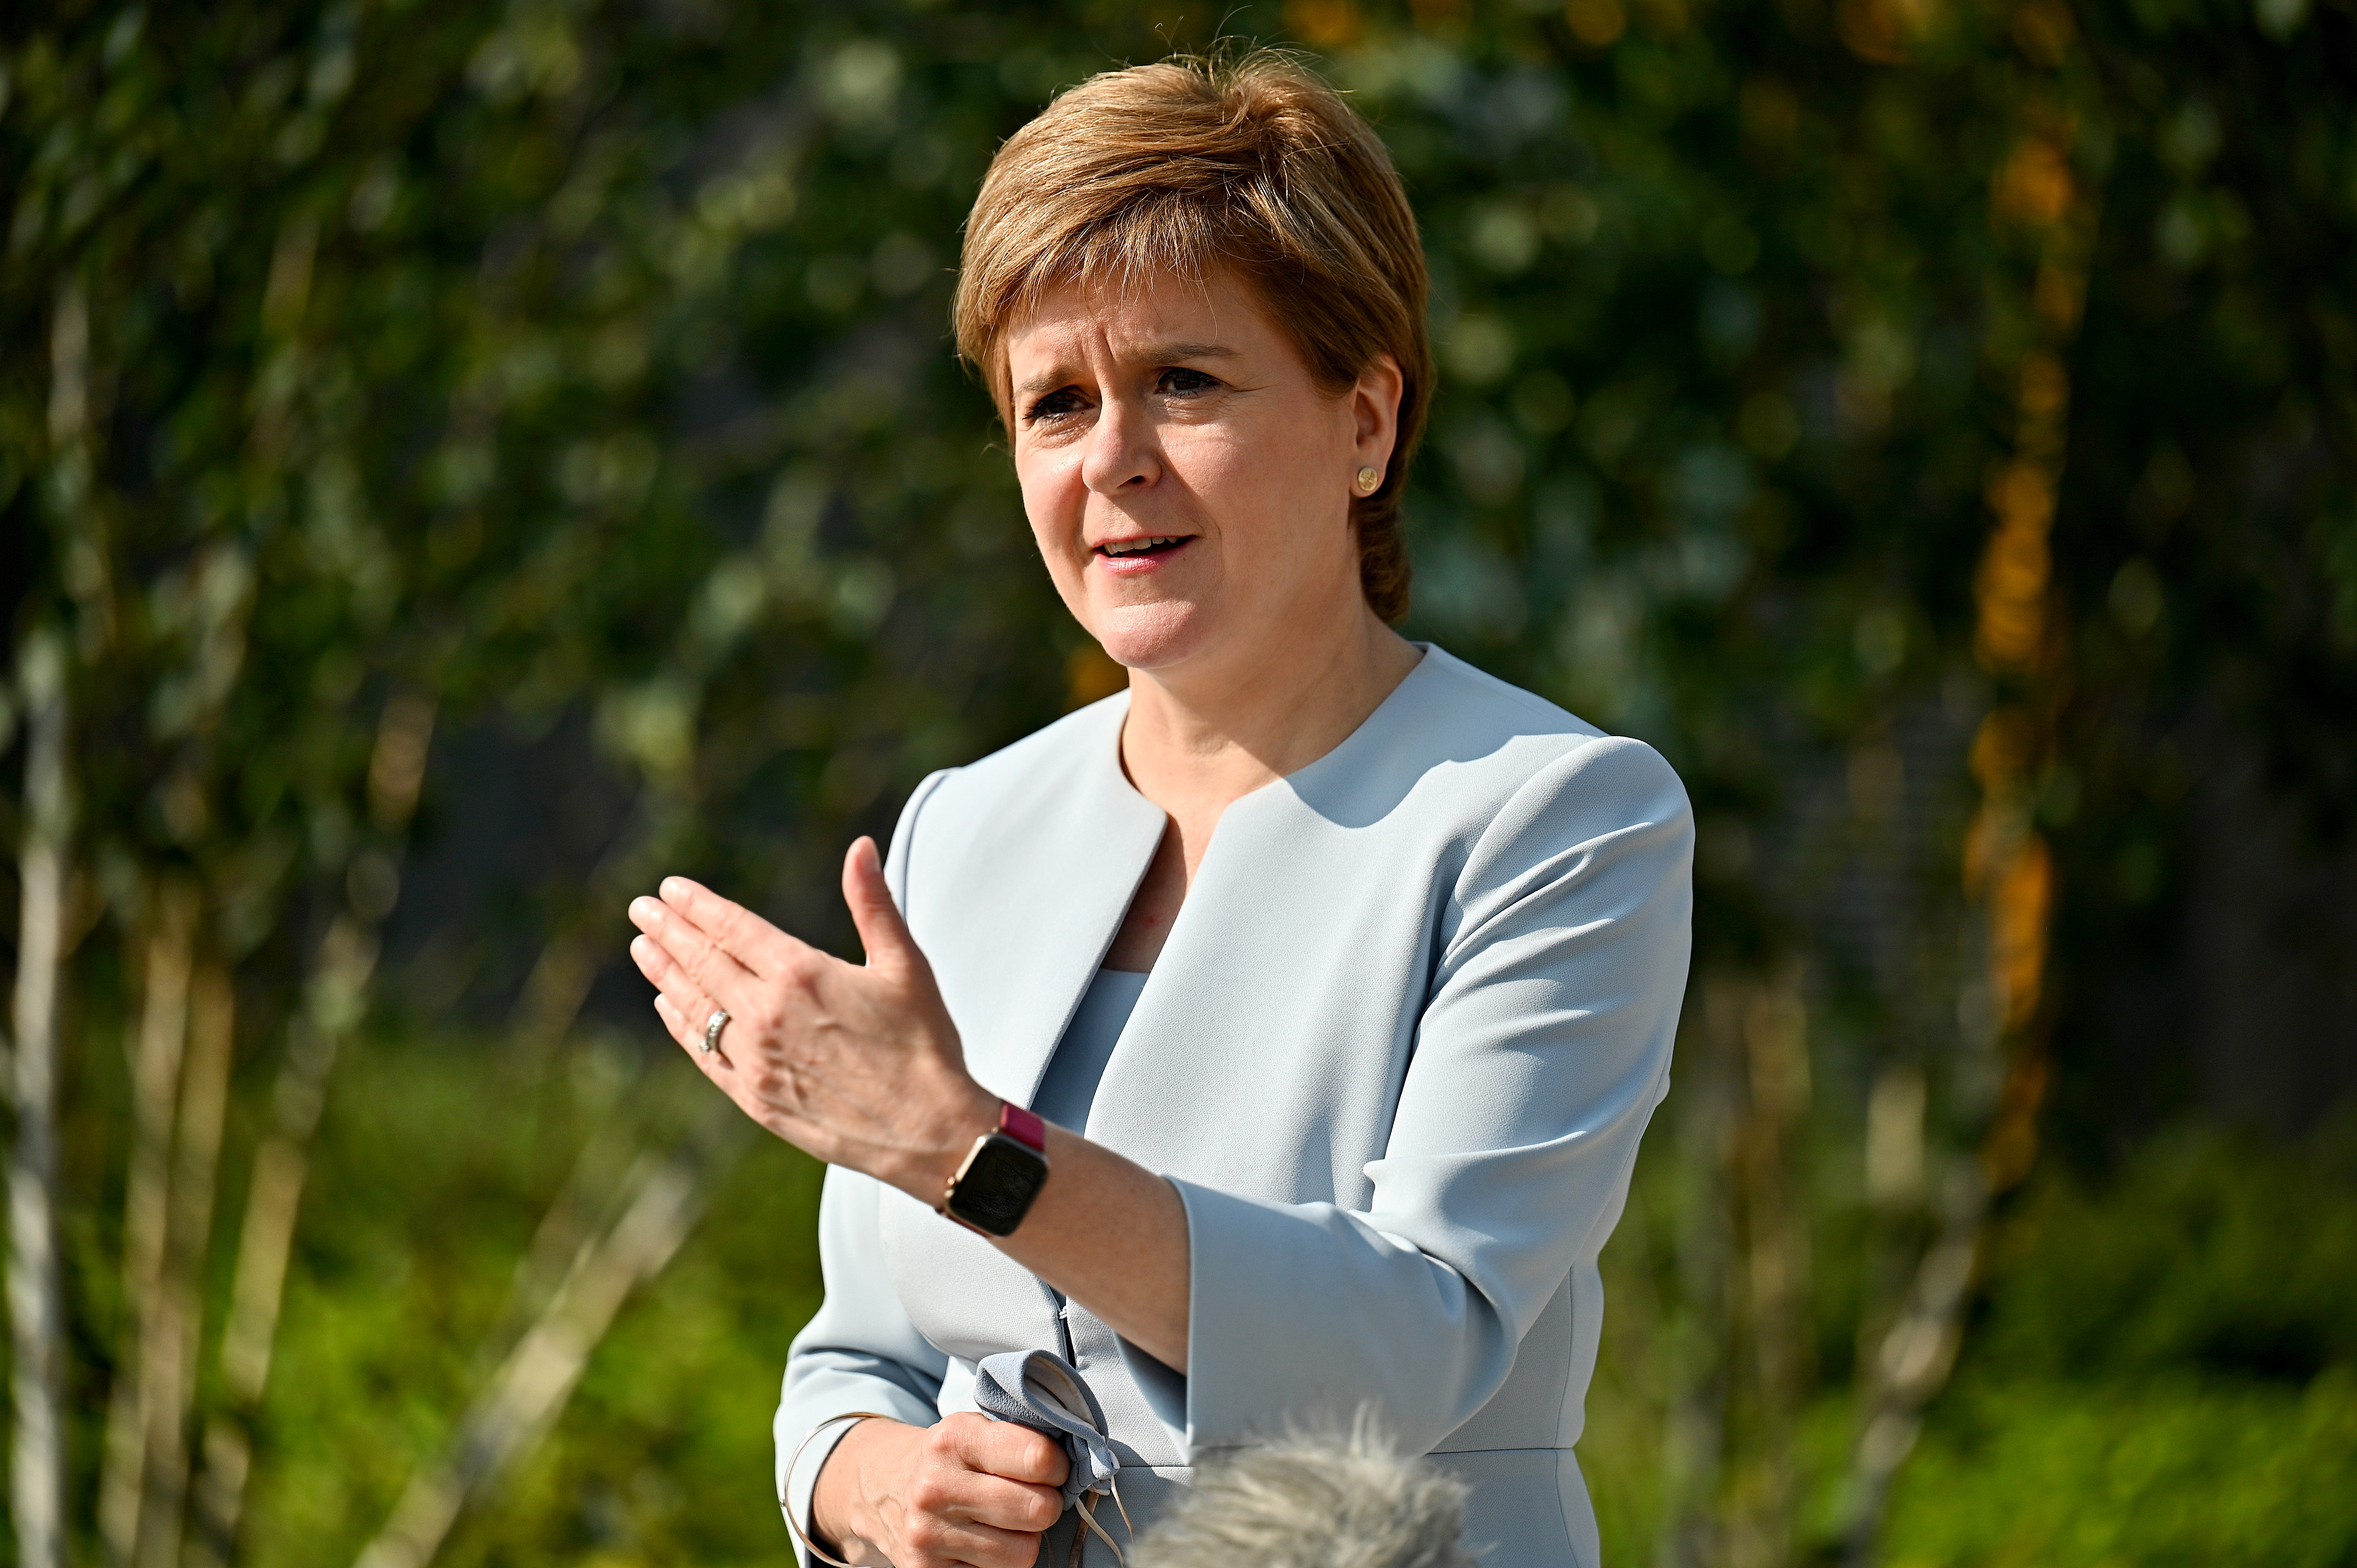 Scotland's First Minister Launches NHS Recovery Plan